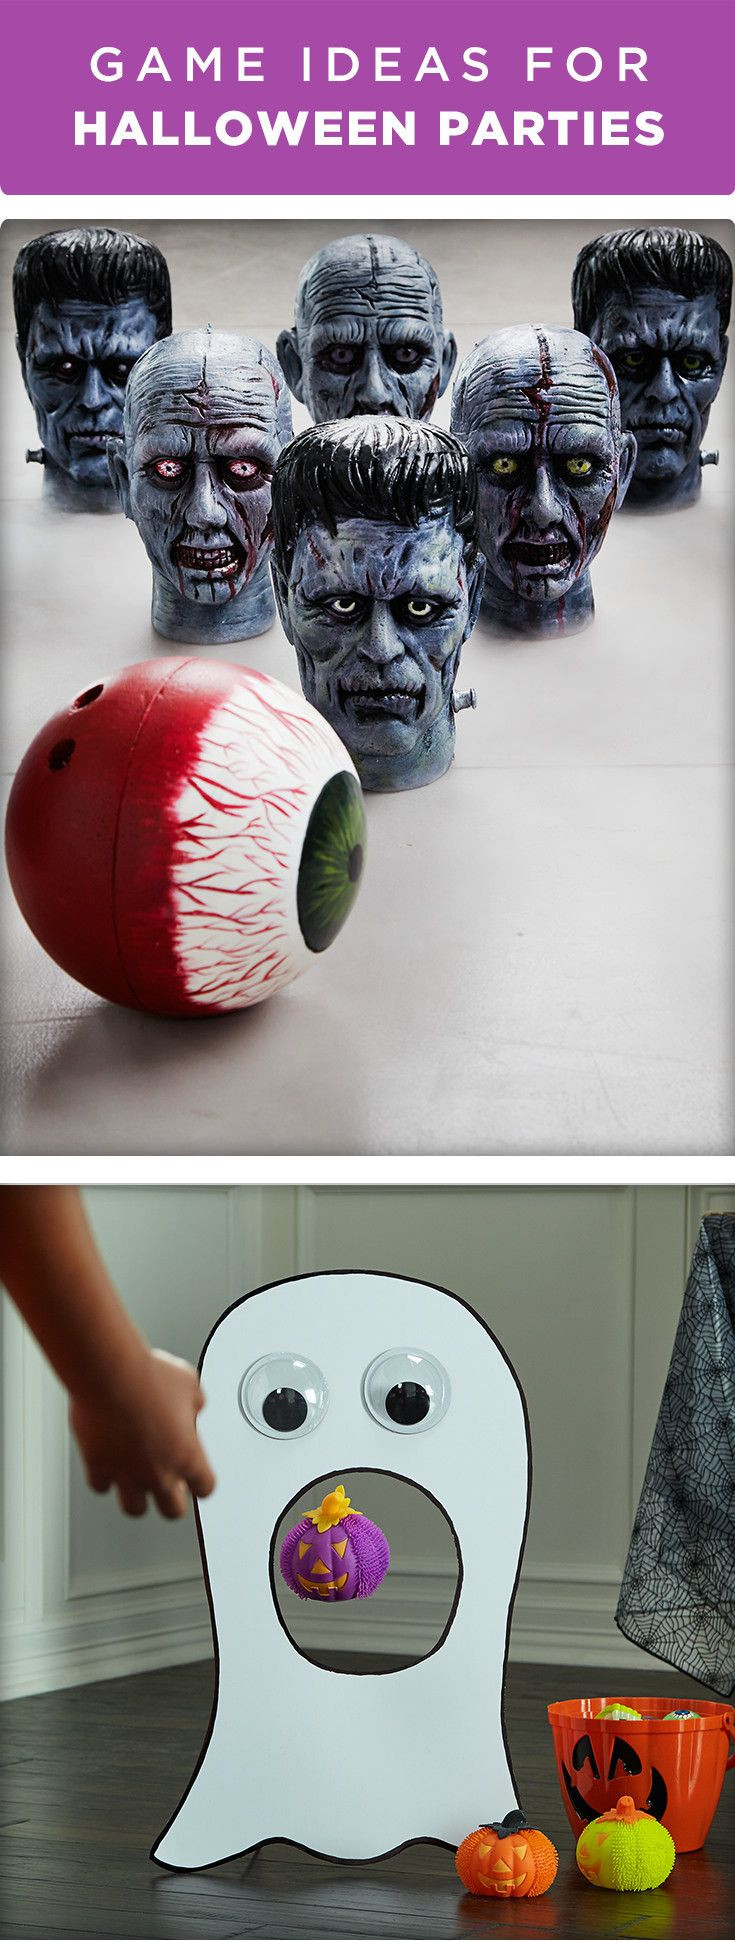 Ideas For Halloween Party Games
 238 best Halloween Games images on Pinterest